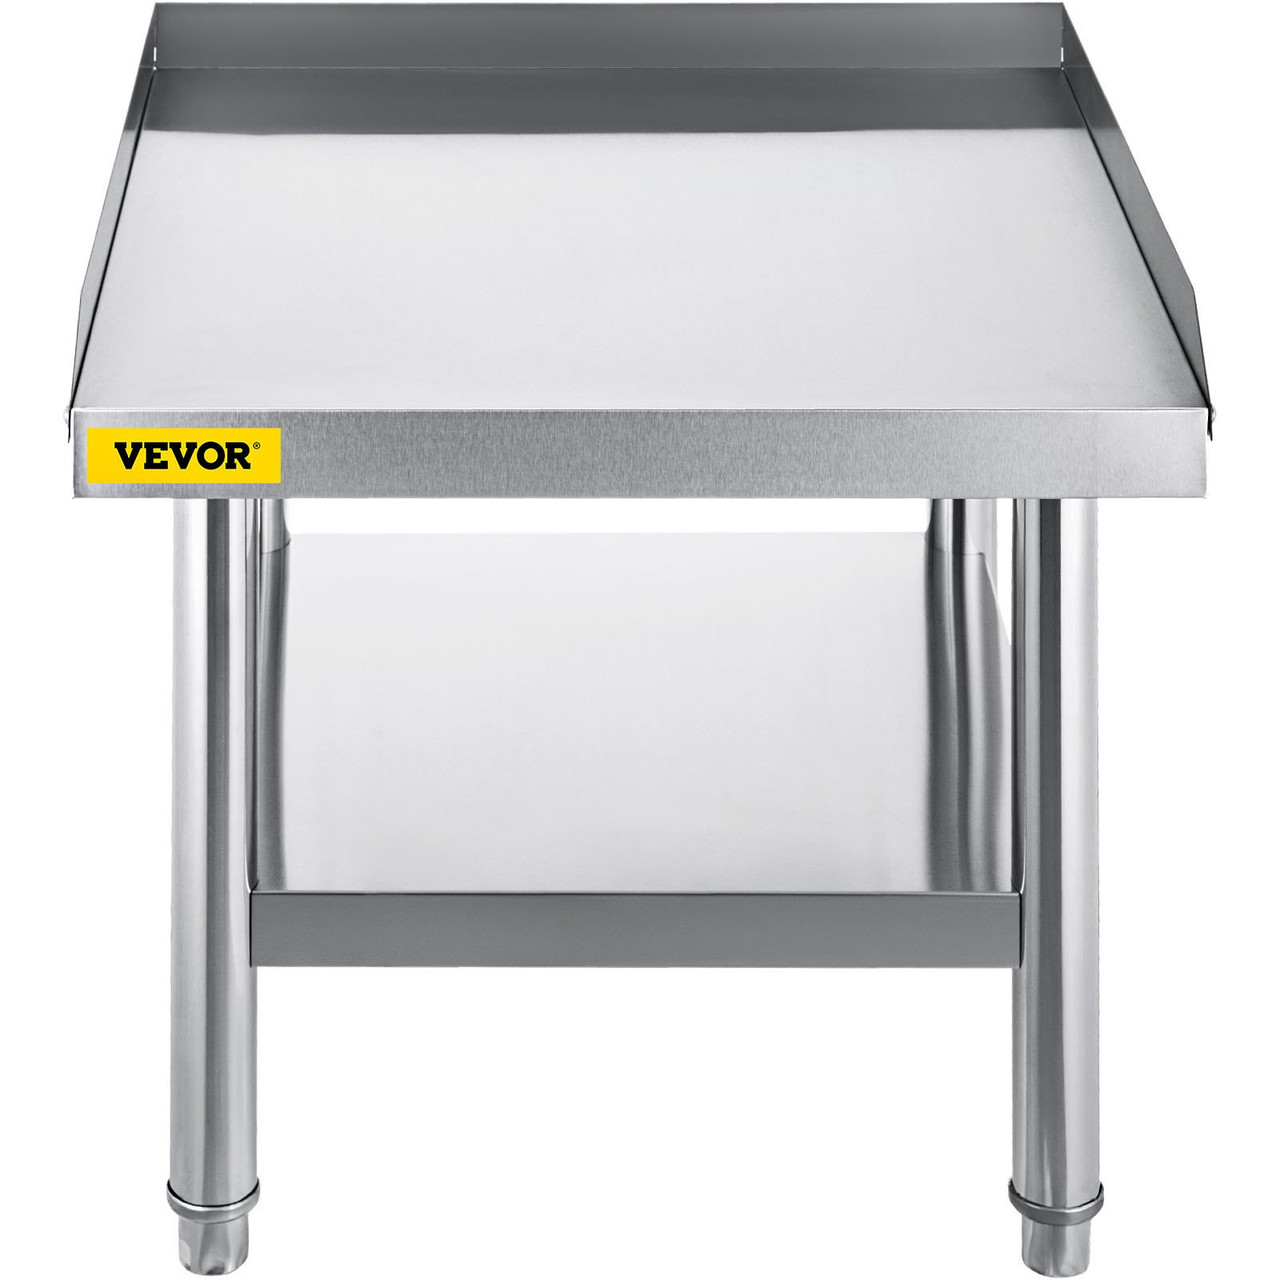 VEVOR Stainless Steel Equipment Grill Stand, 24 x 24 x 24 Inches Stainless Table, Grill Stand Table with Adjustable Storage Undershelf, Equipment Stand Grill Table for Hotel, Home, Restaurant Kitchen